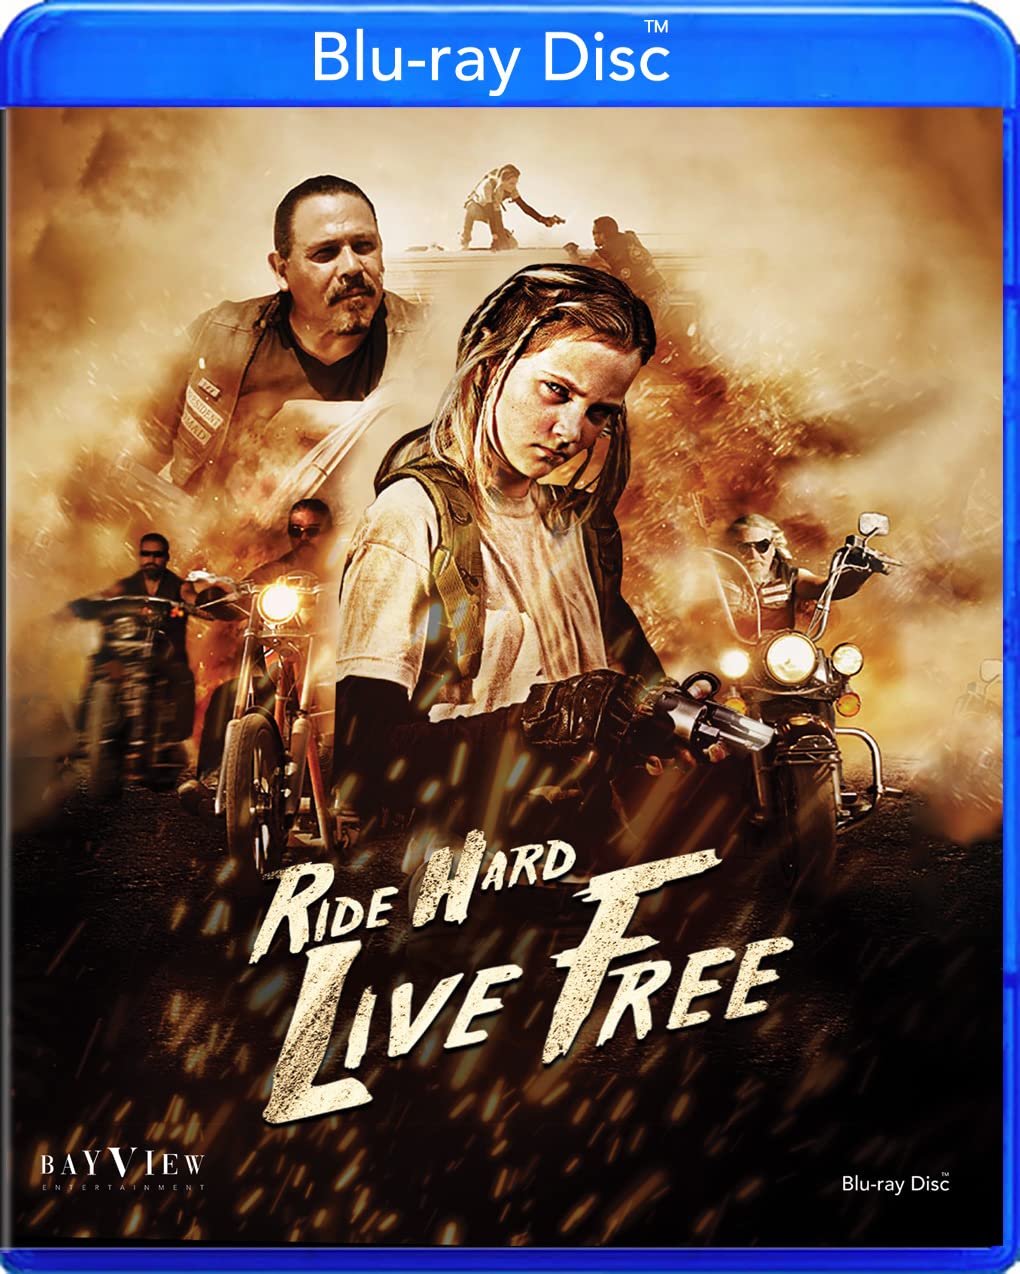 Sci-fi actioner RIDE HARD LIVE FREE comes to Blu-ray 28th March 2023 from BayView Entertainment